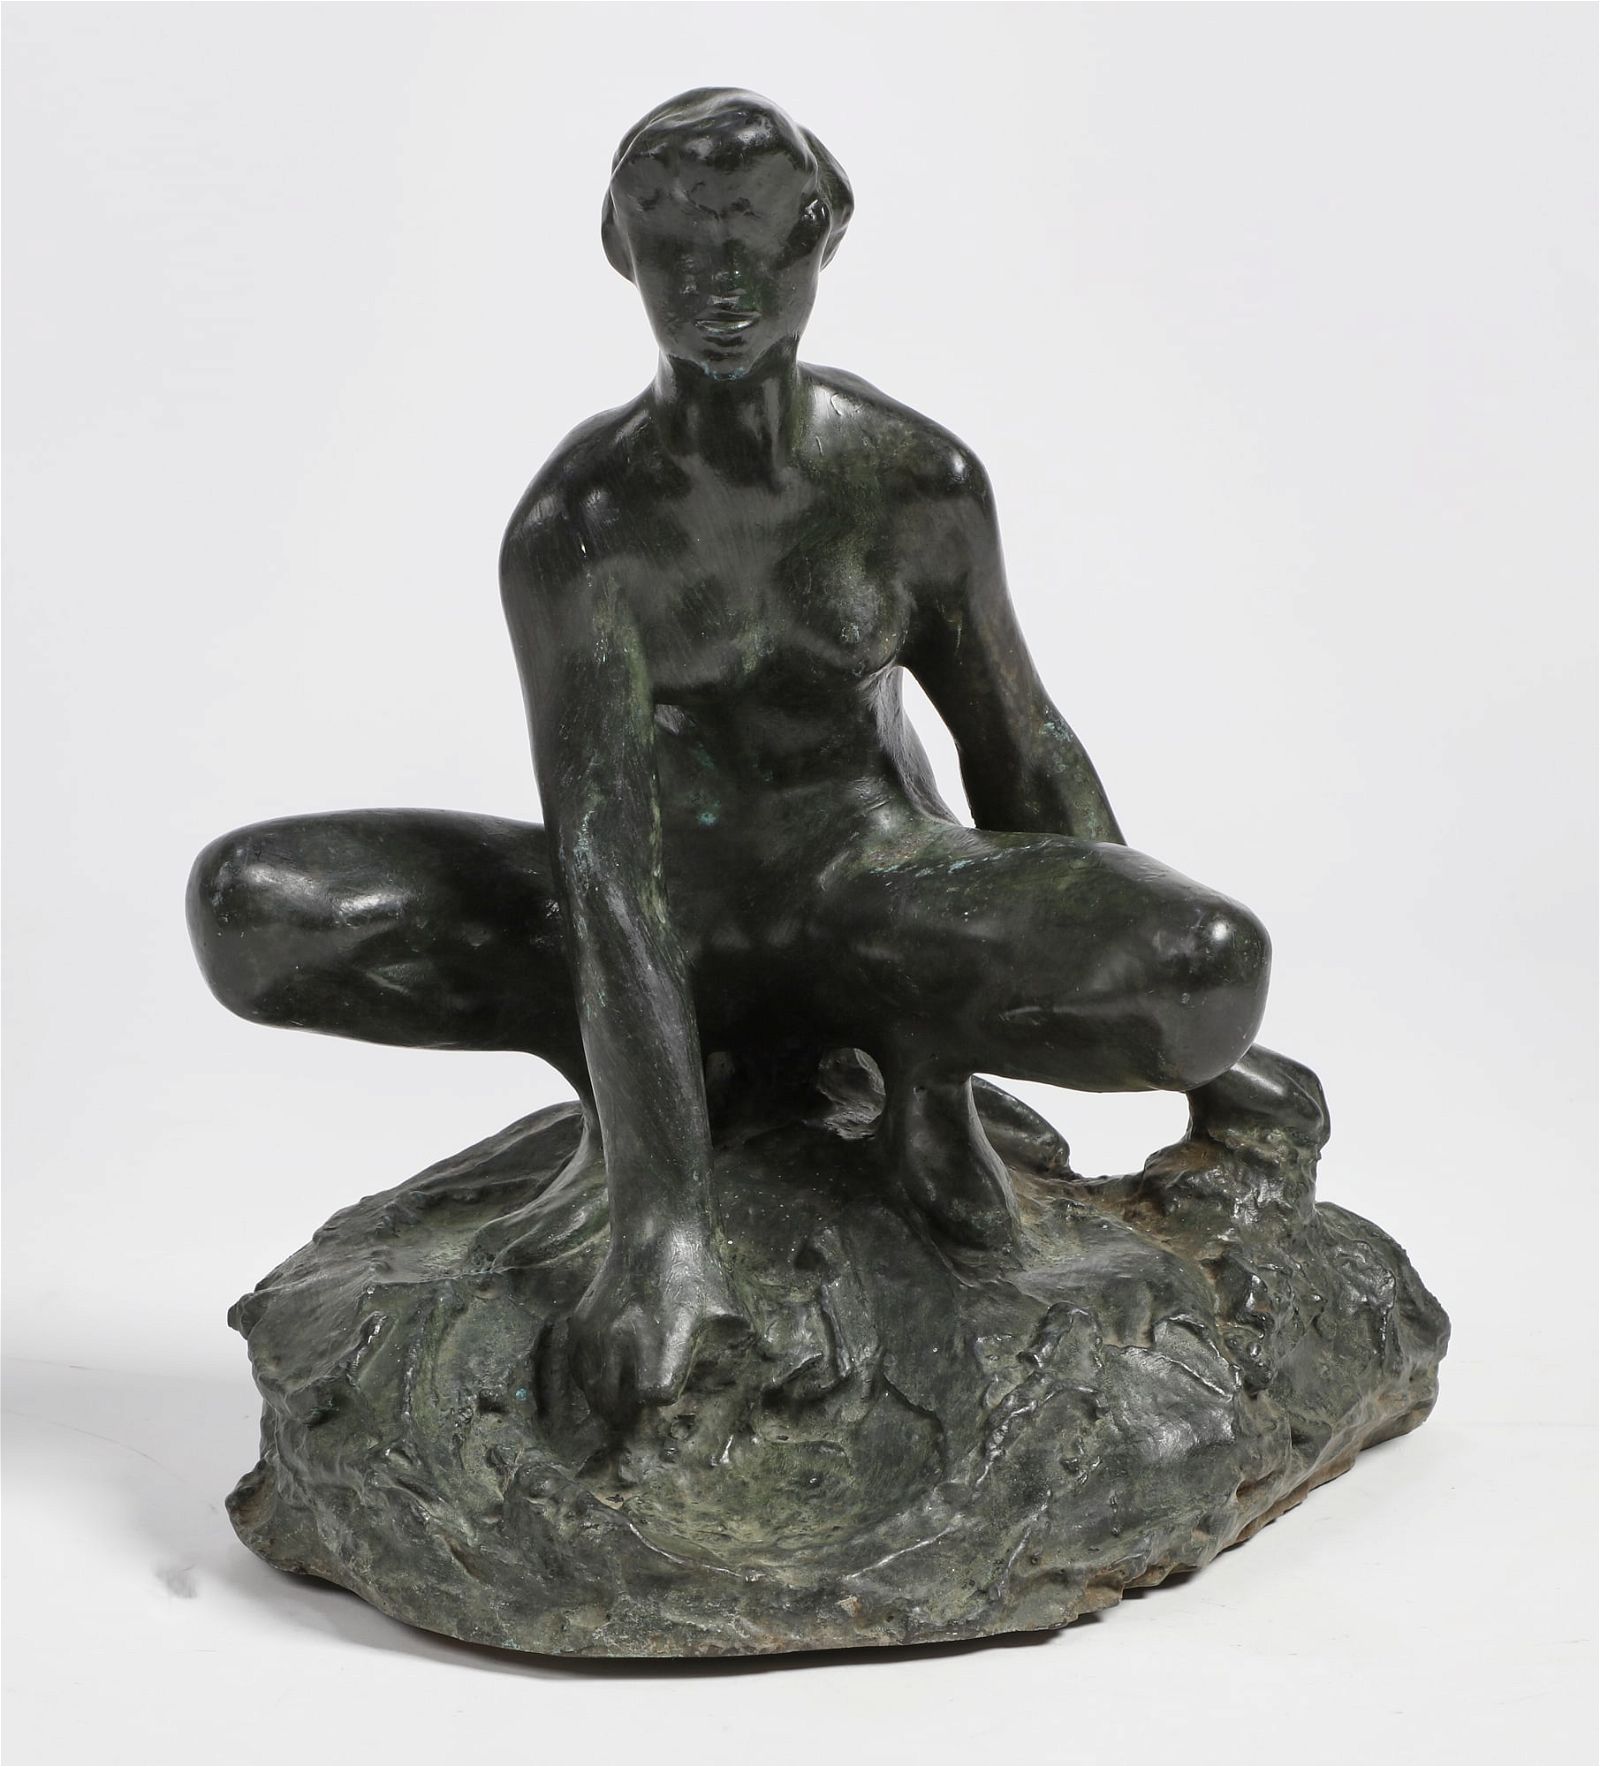 AFTER AUGUSTE RODIN, "BAIGNEUSE